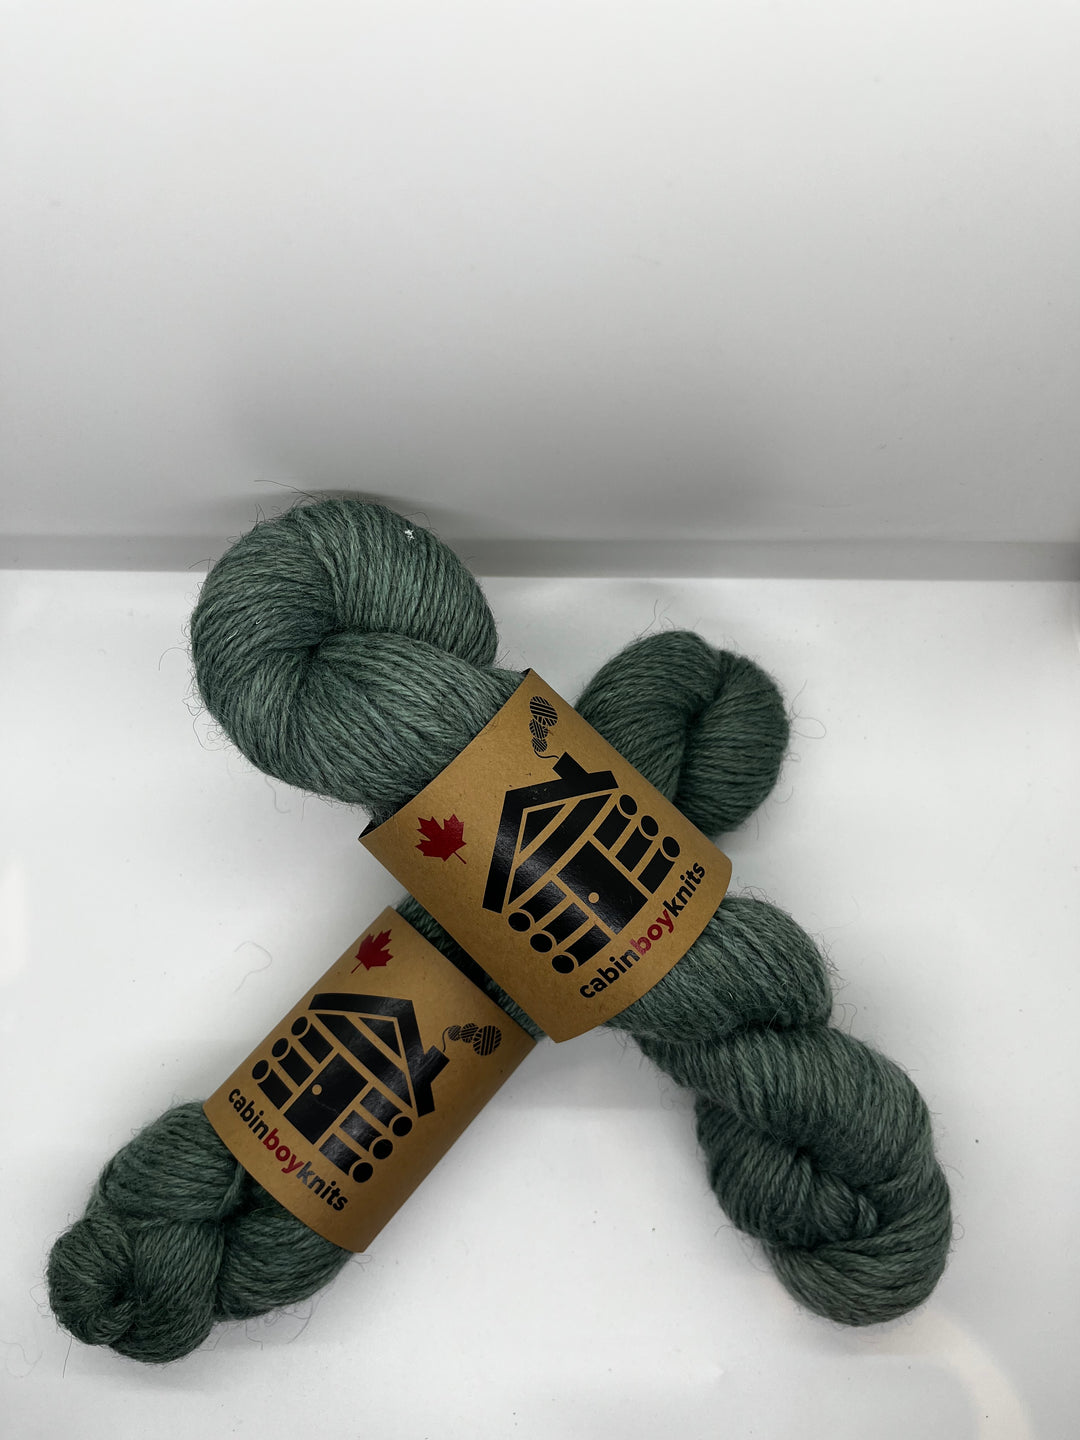 CabinBoyKnits Worsted